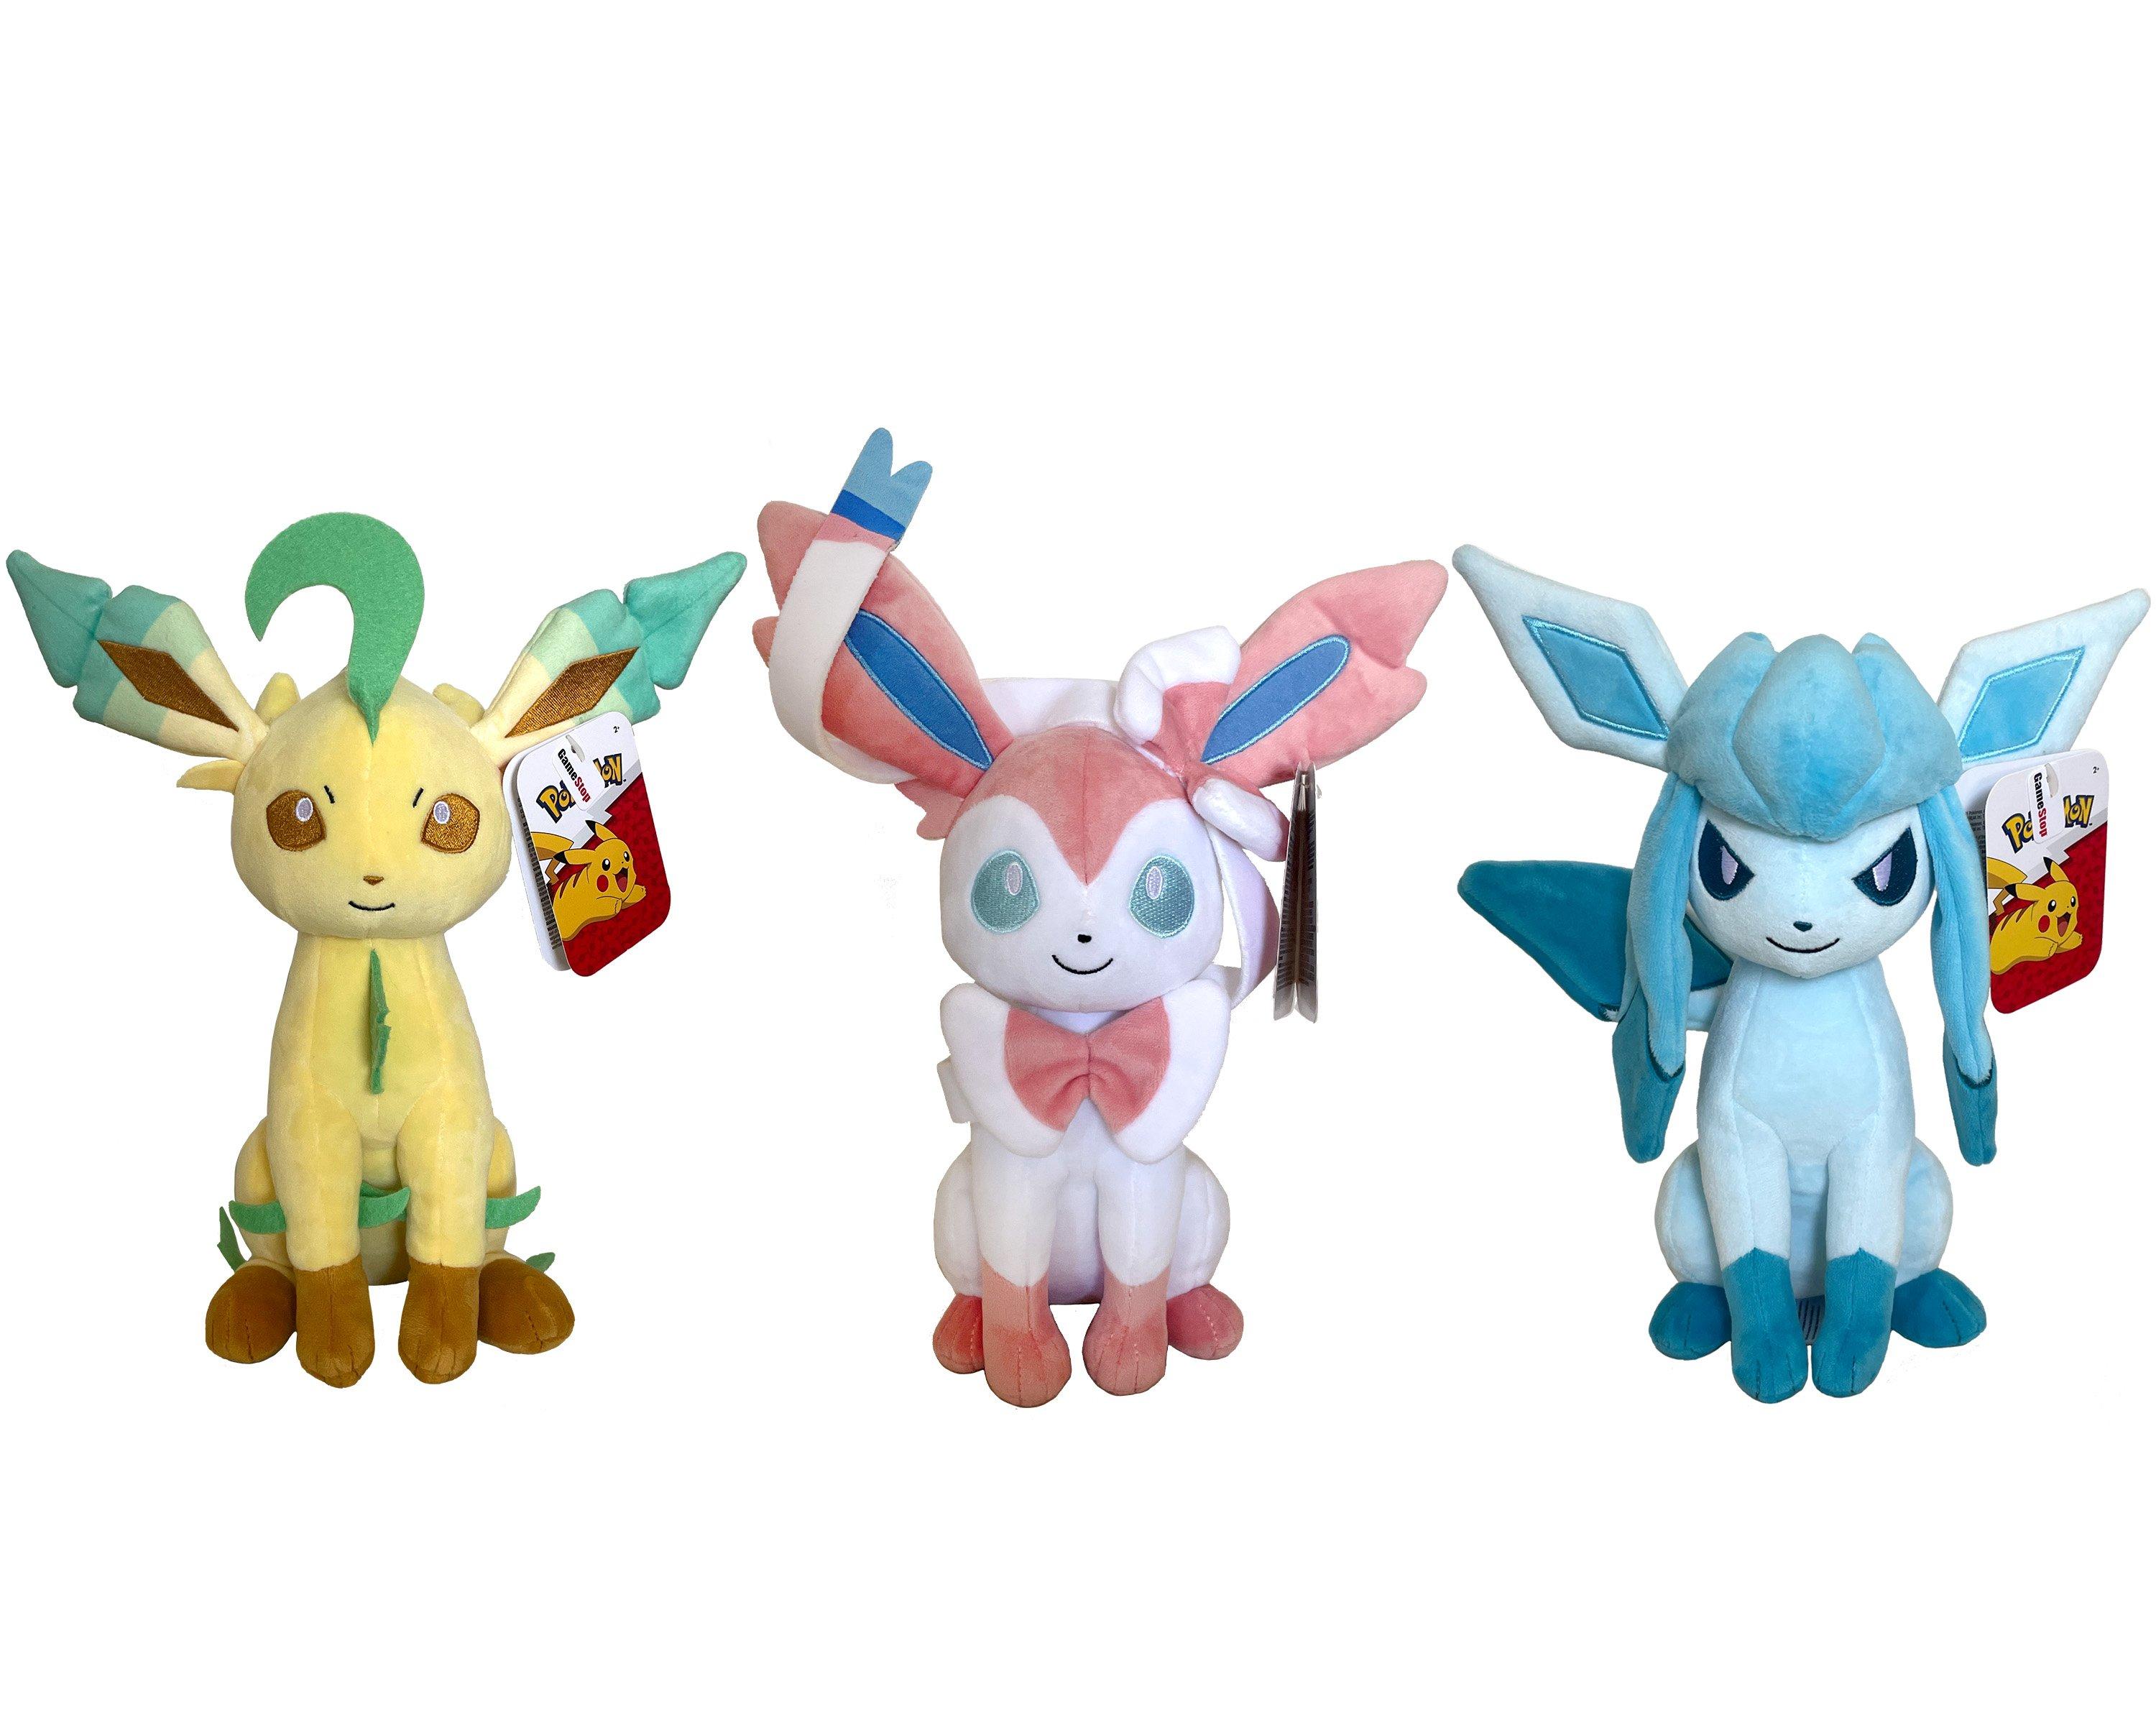 list item 1 of 4 Pokemon 8in Plush 3-Pack (Sylveon, Glaceon, Leafeon) GameStop Exclusive